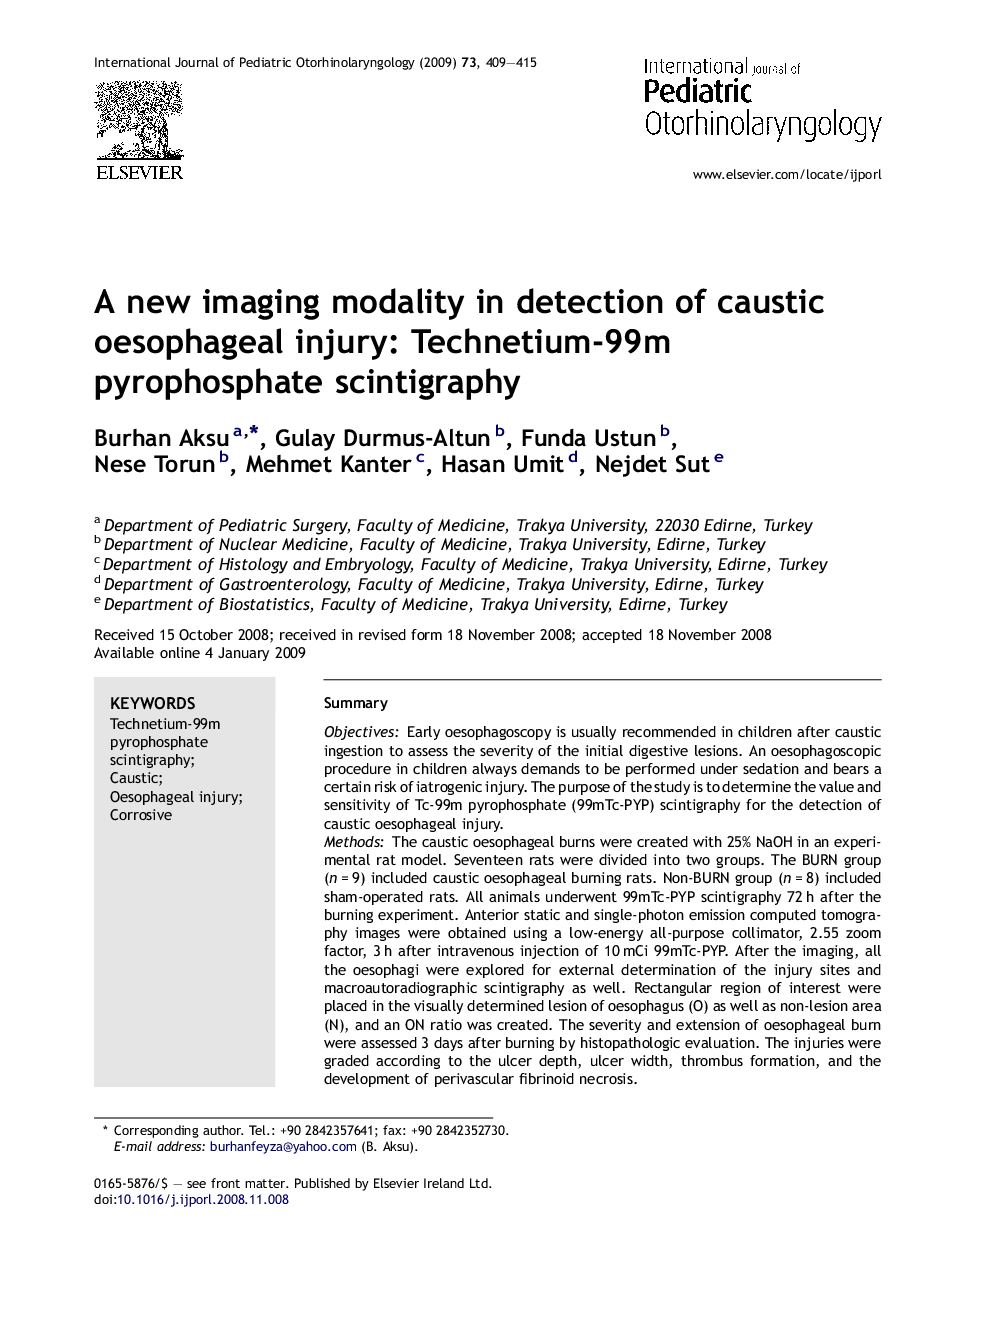 A new imaging modality in detection of caustic oesophageal injury: Technetium-99m pyrophosphate scintigraphy